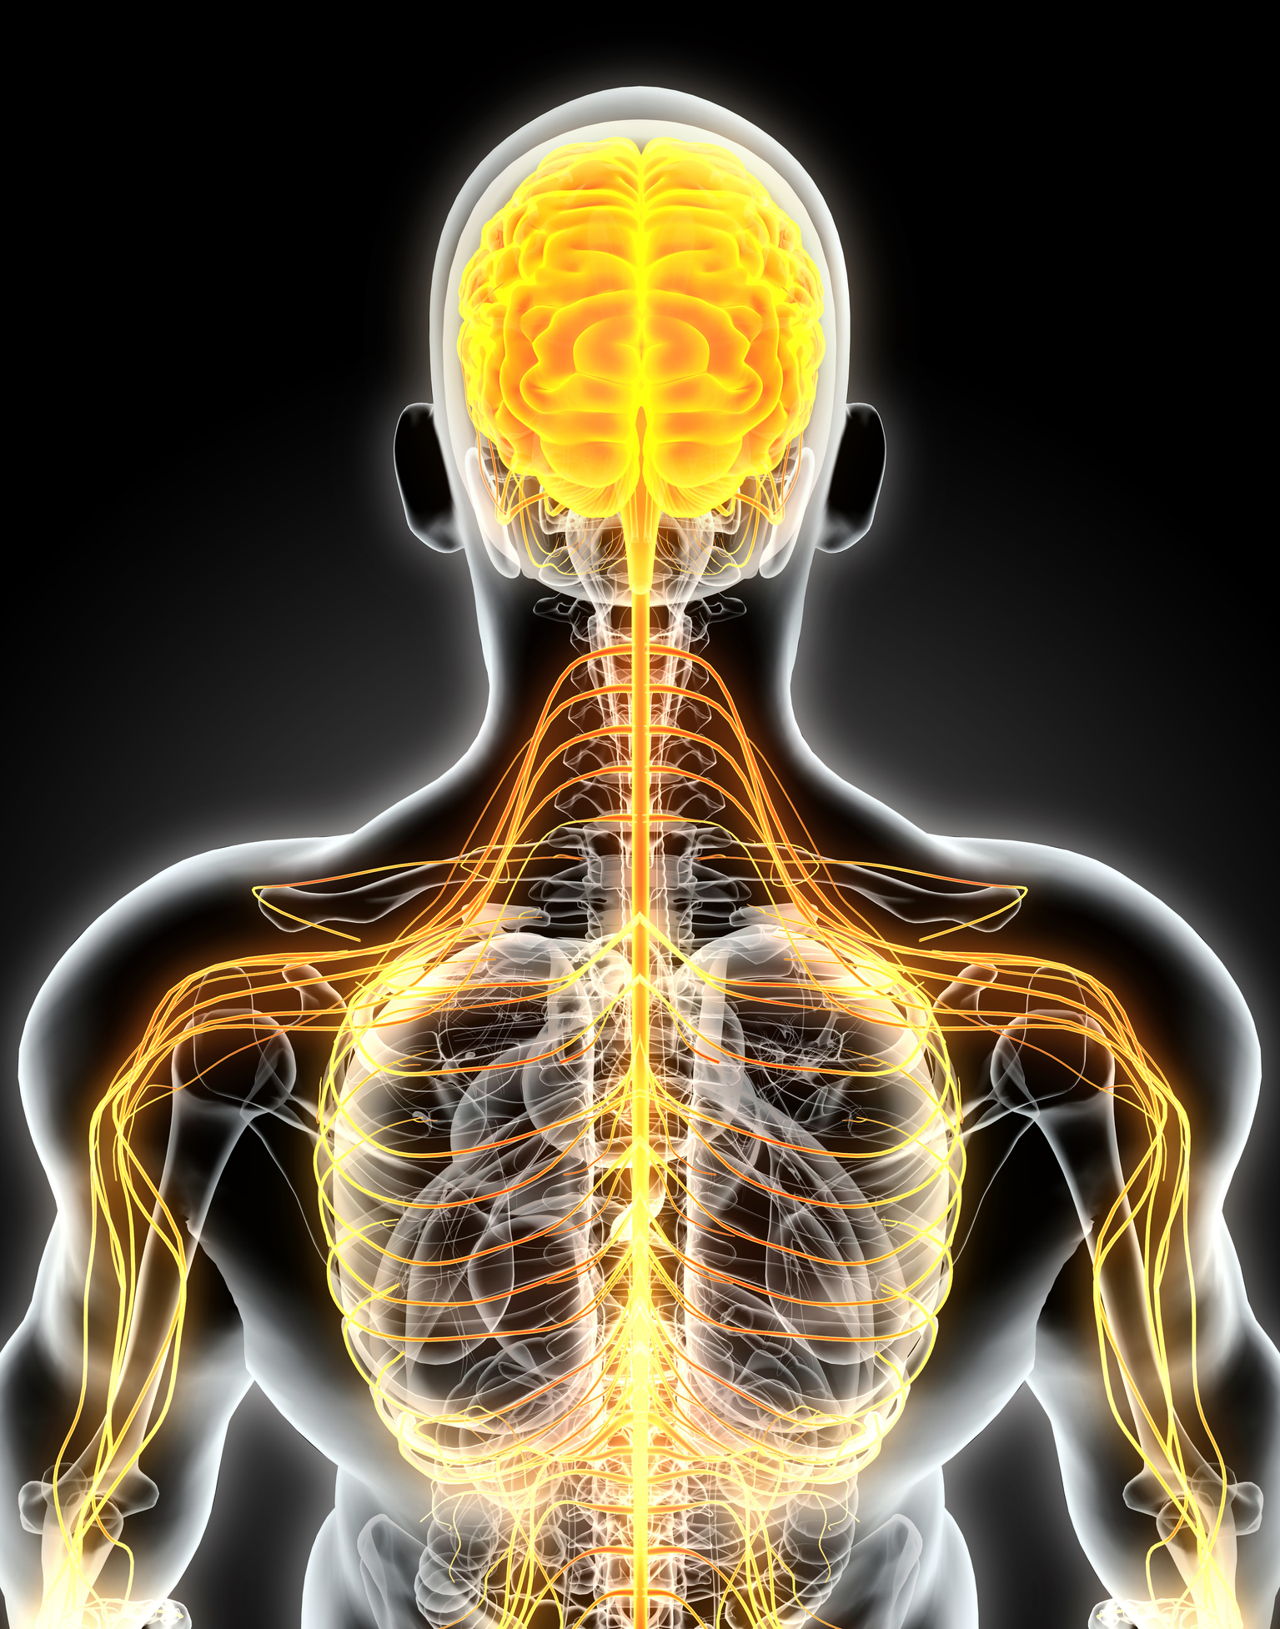 Brilliantly Interesting Facts About the Nervous System